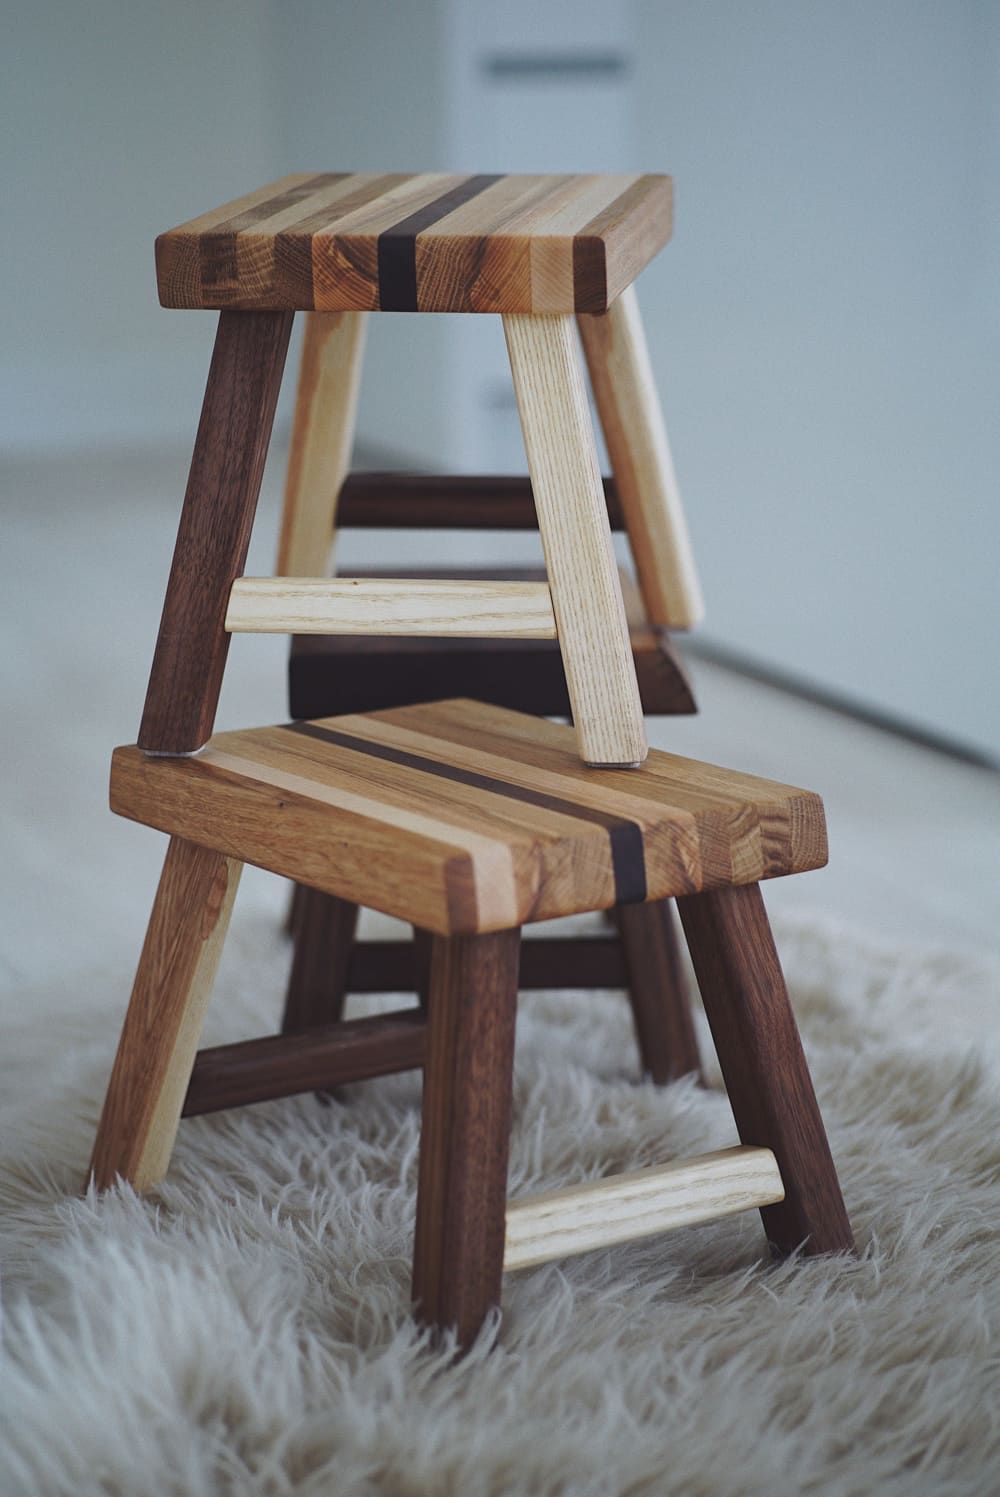 Wooden stools- Benefits of wooden stools
for furniture products